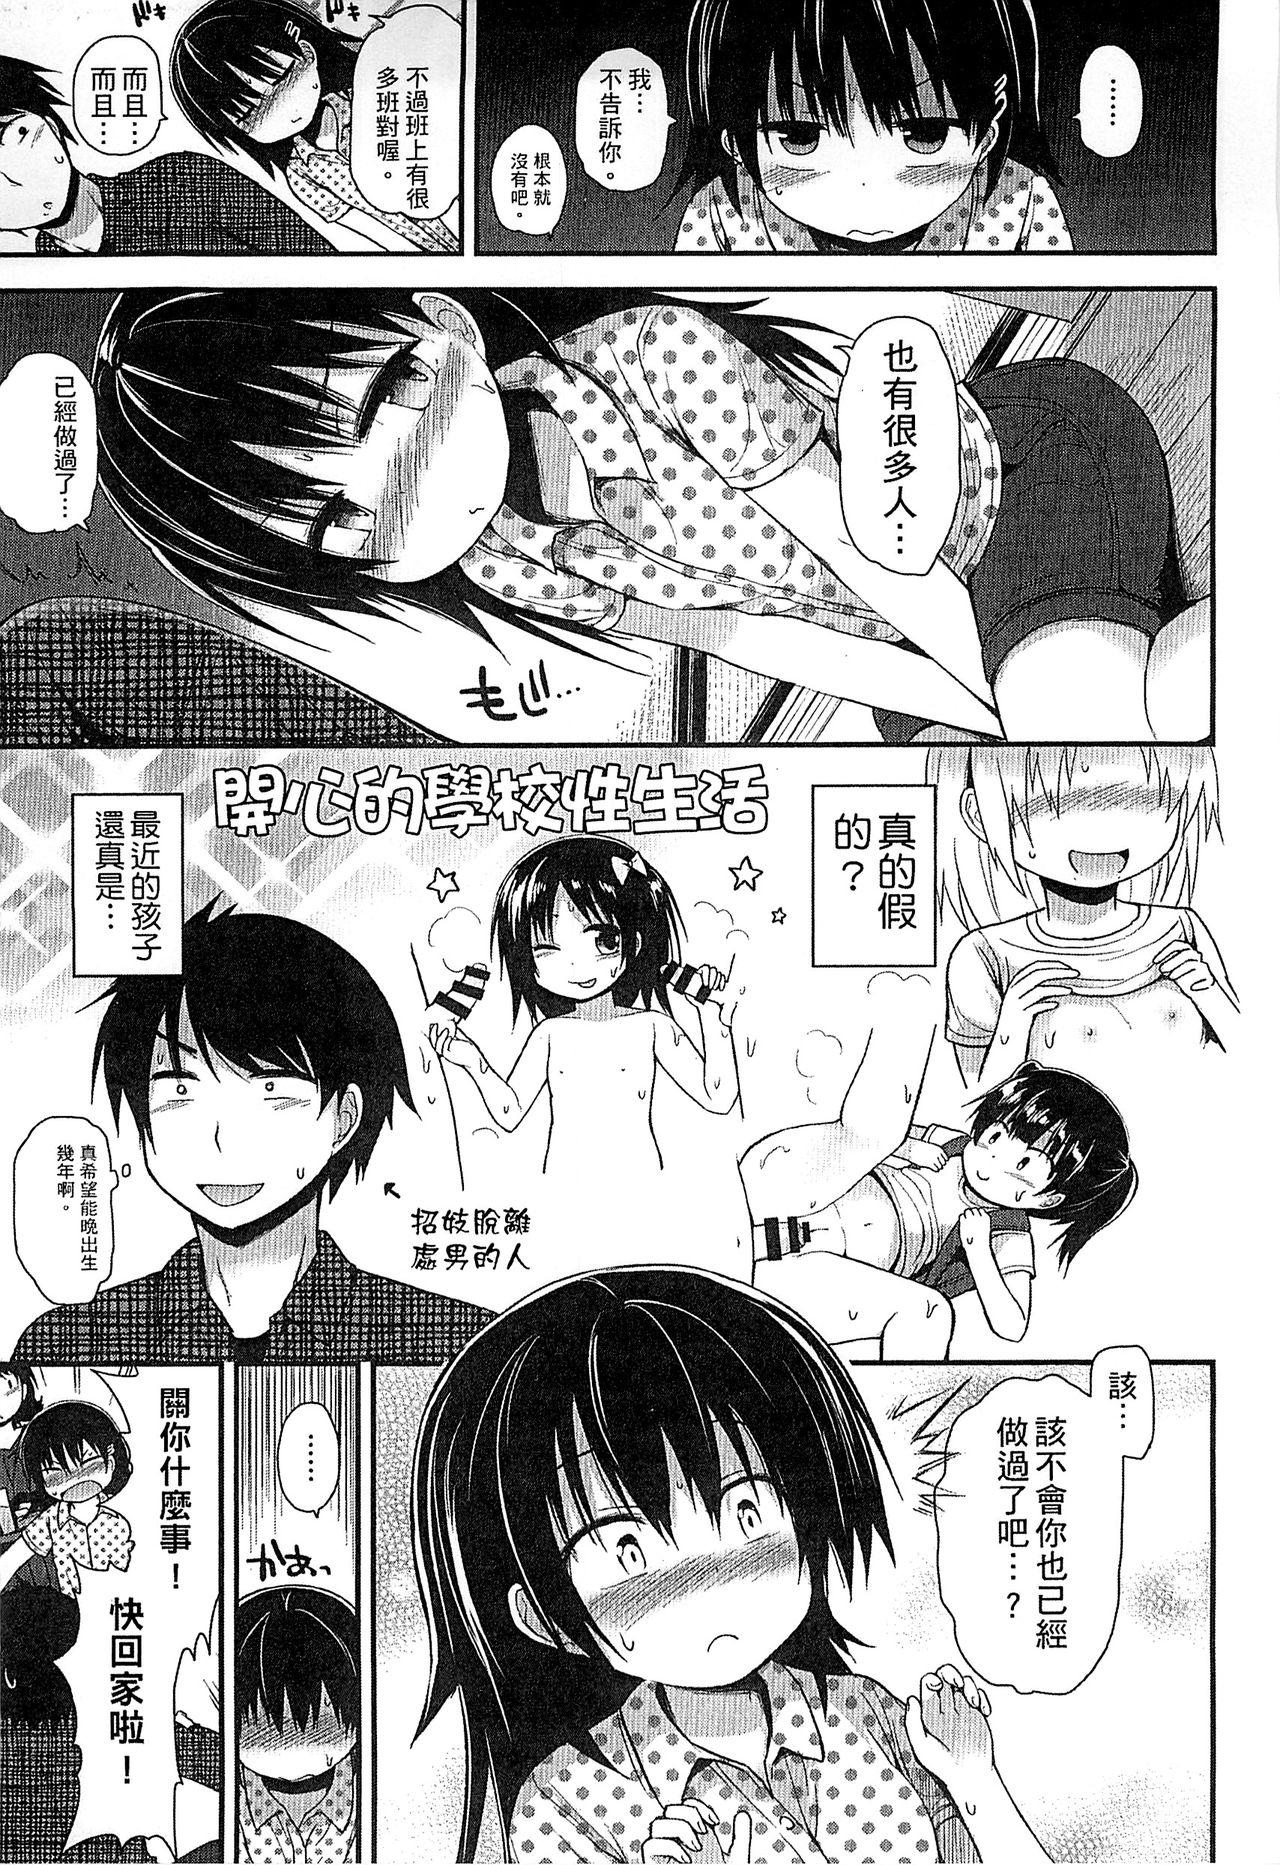 4some Gyutto Issho | 緊緊相依 Orgasms - Page 7